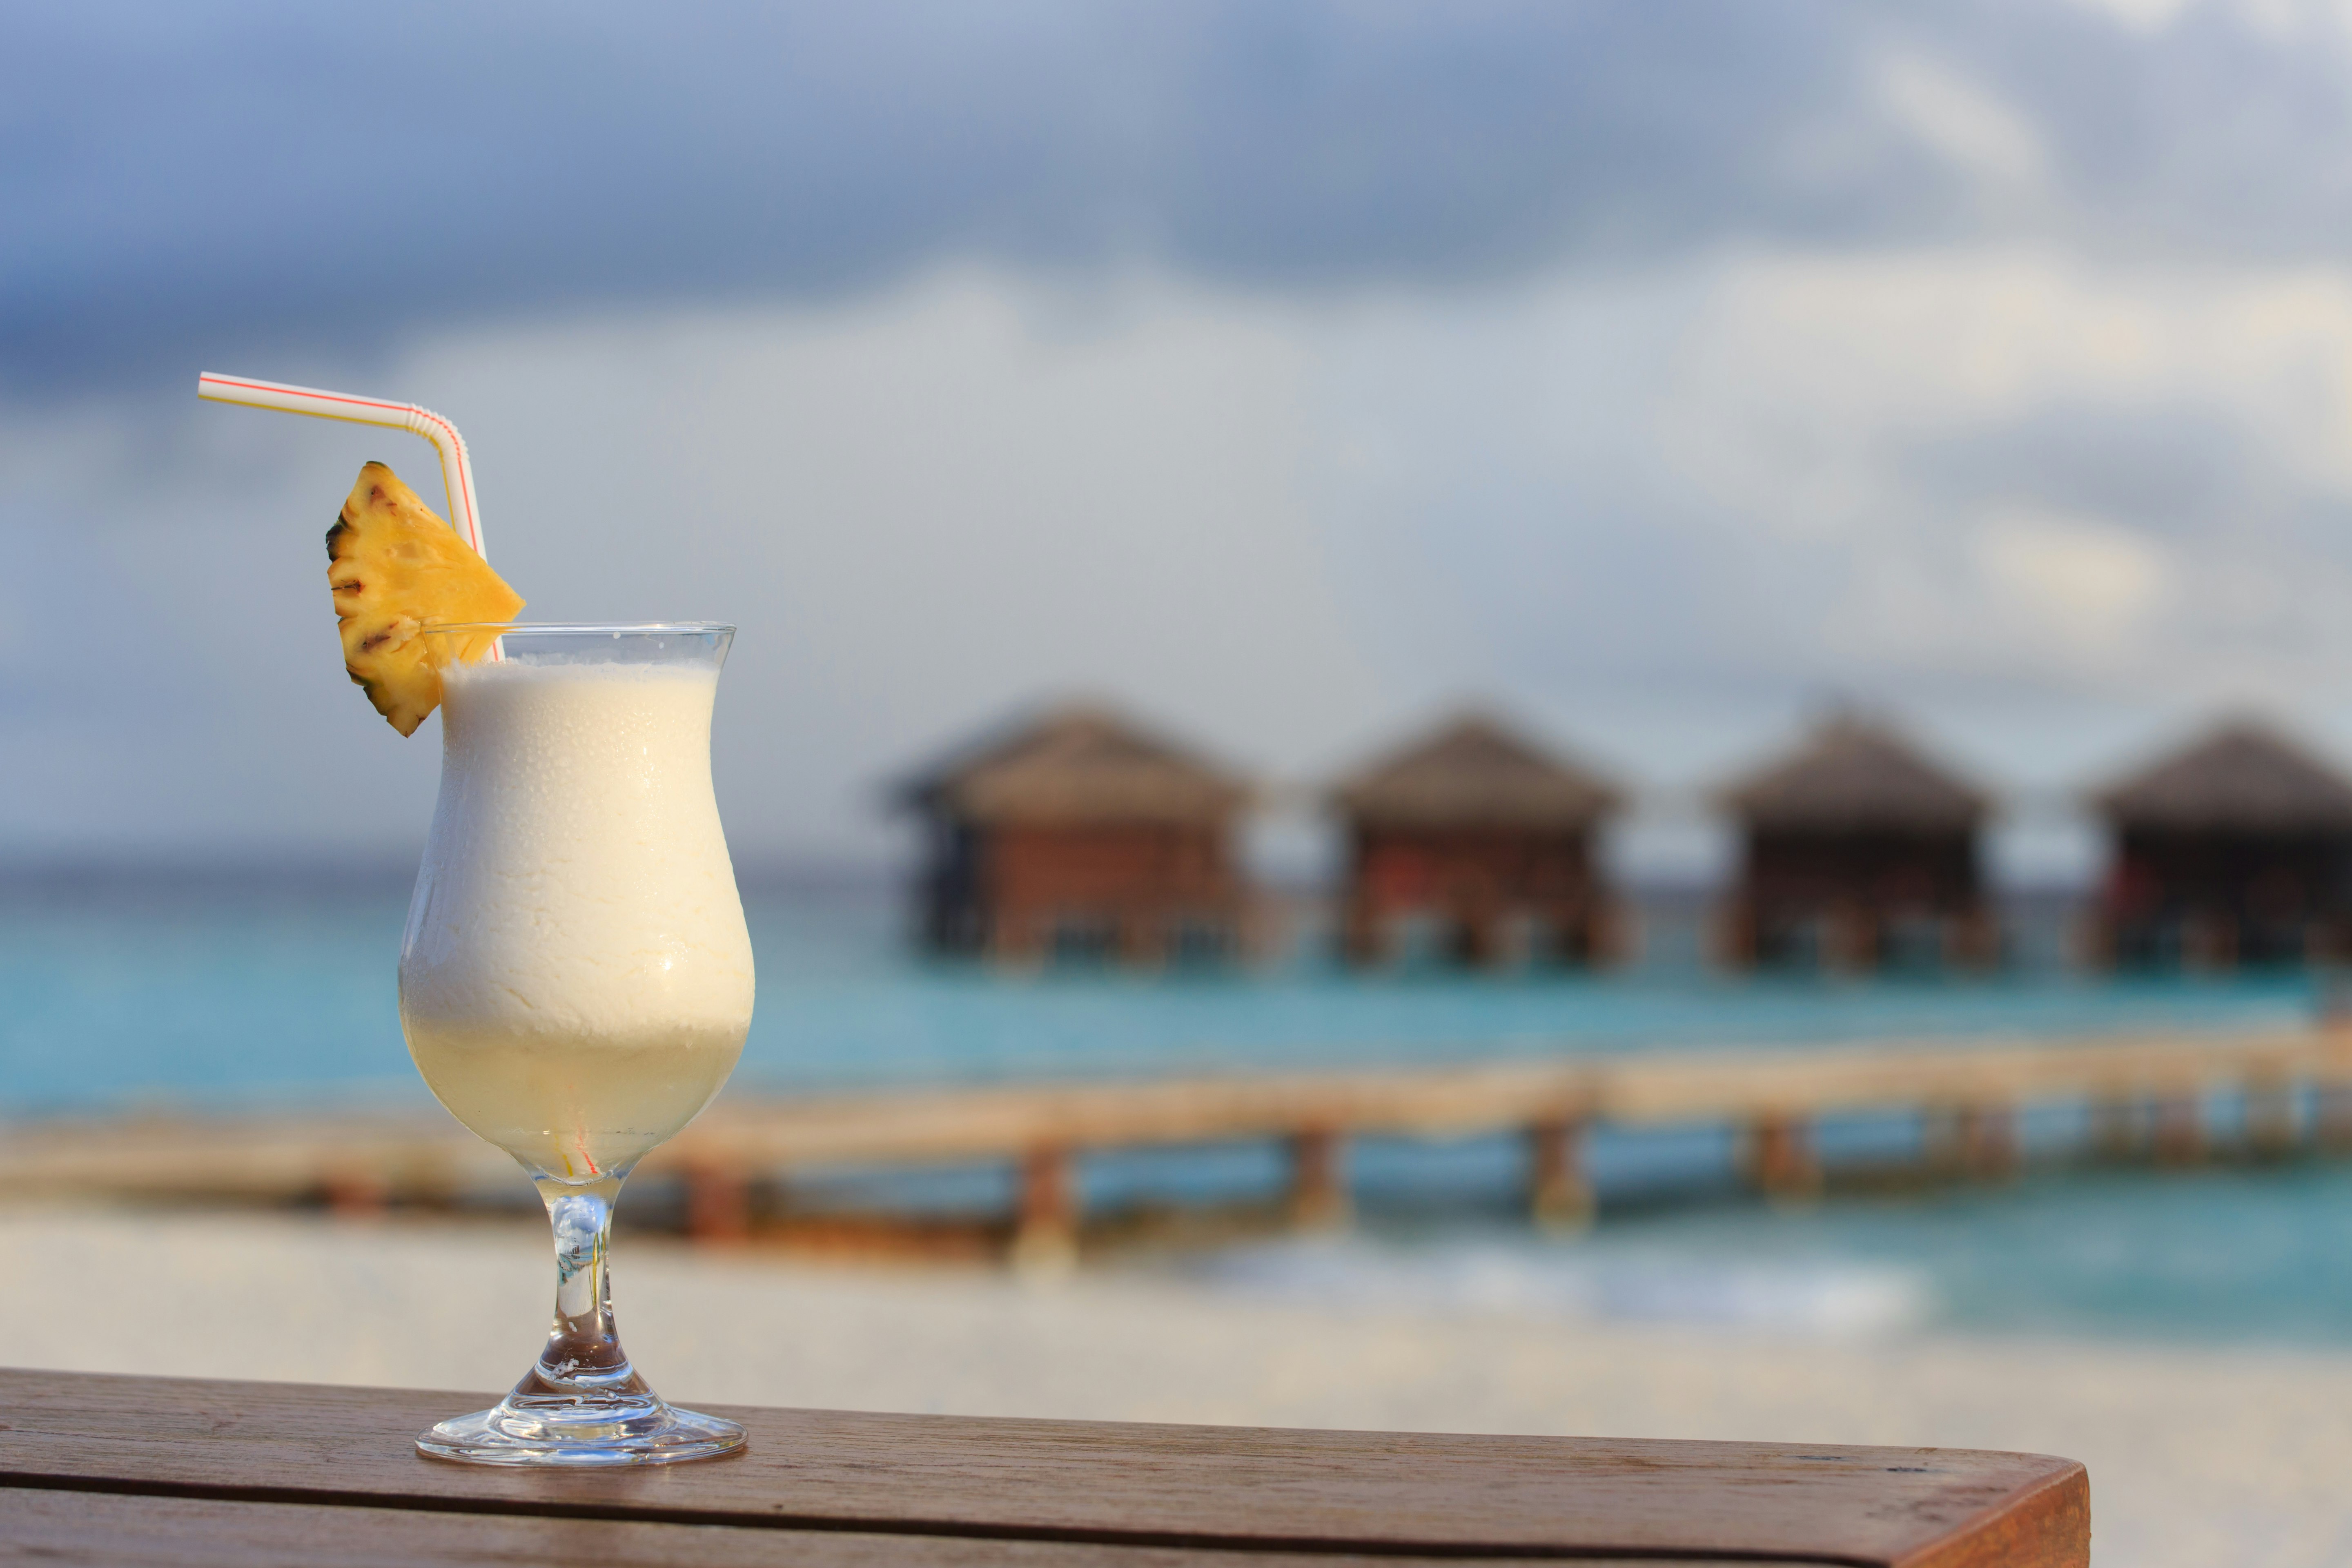 A poco grande glass of Piña Colada garnished with a pineapple wedge and a red and white stripped drinking straw sits on a wooden ledge. In the background you can see four bungalows in the ocean.